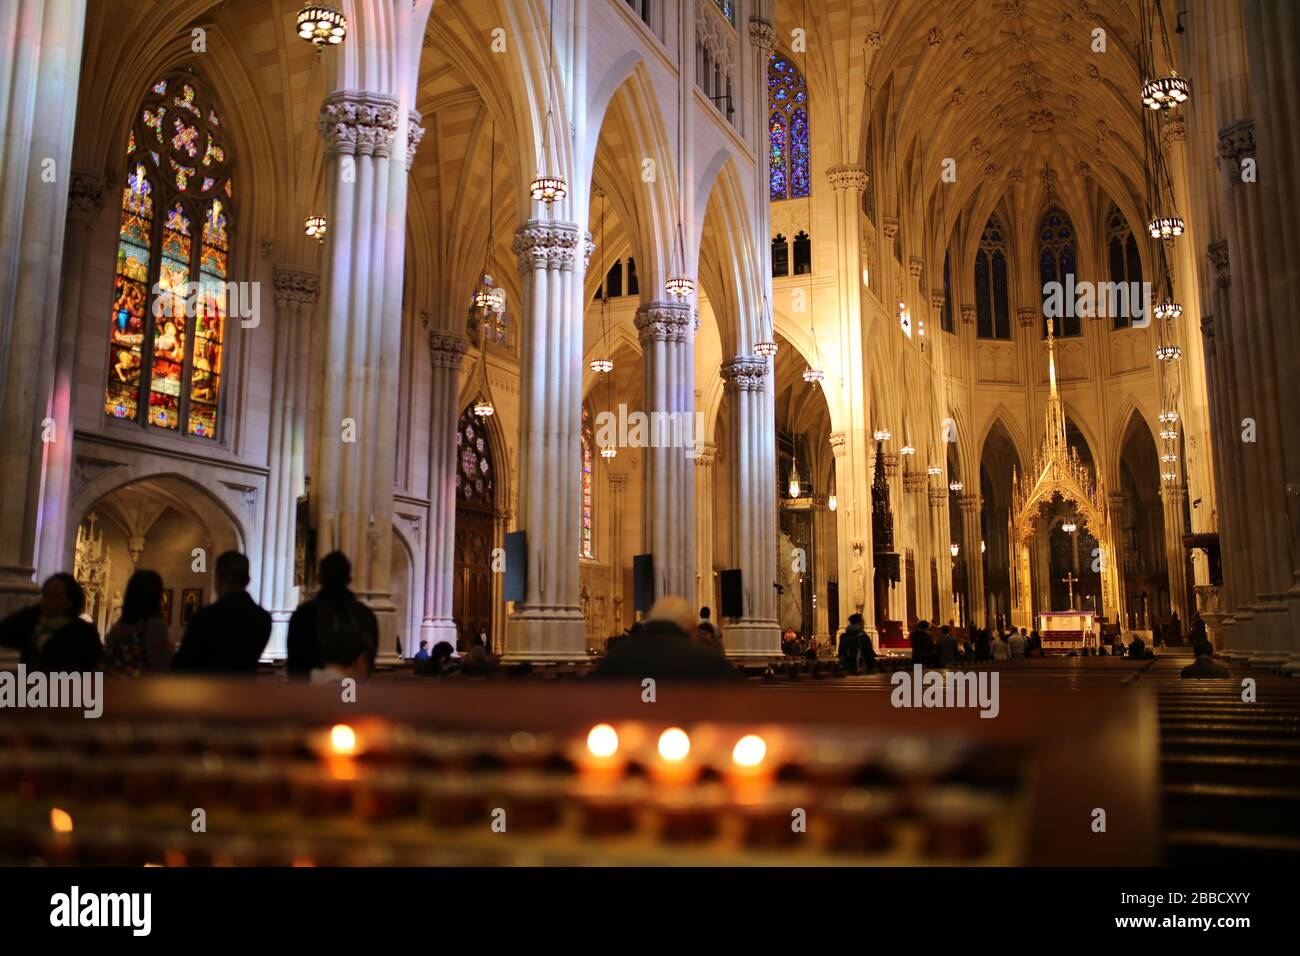 Interior View of St Patricks Cathedral, New York Stock Photo